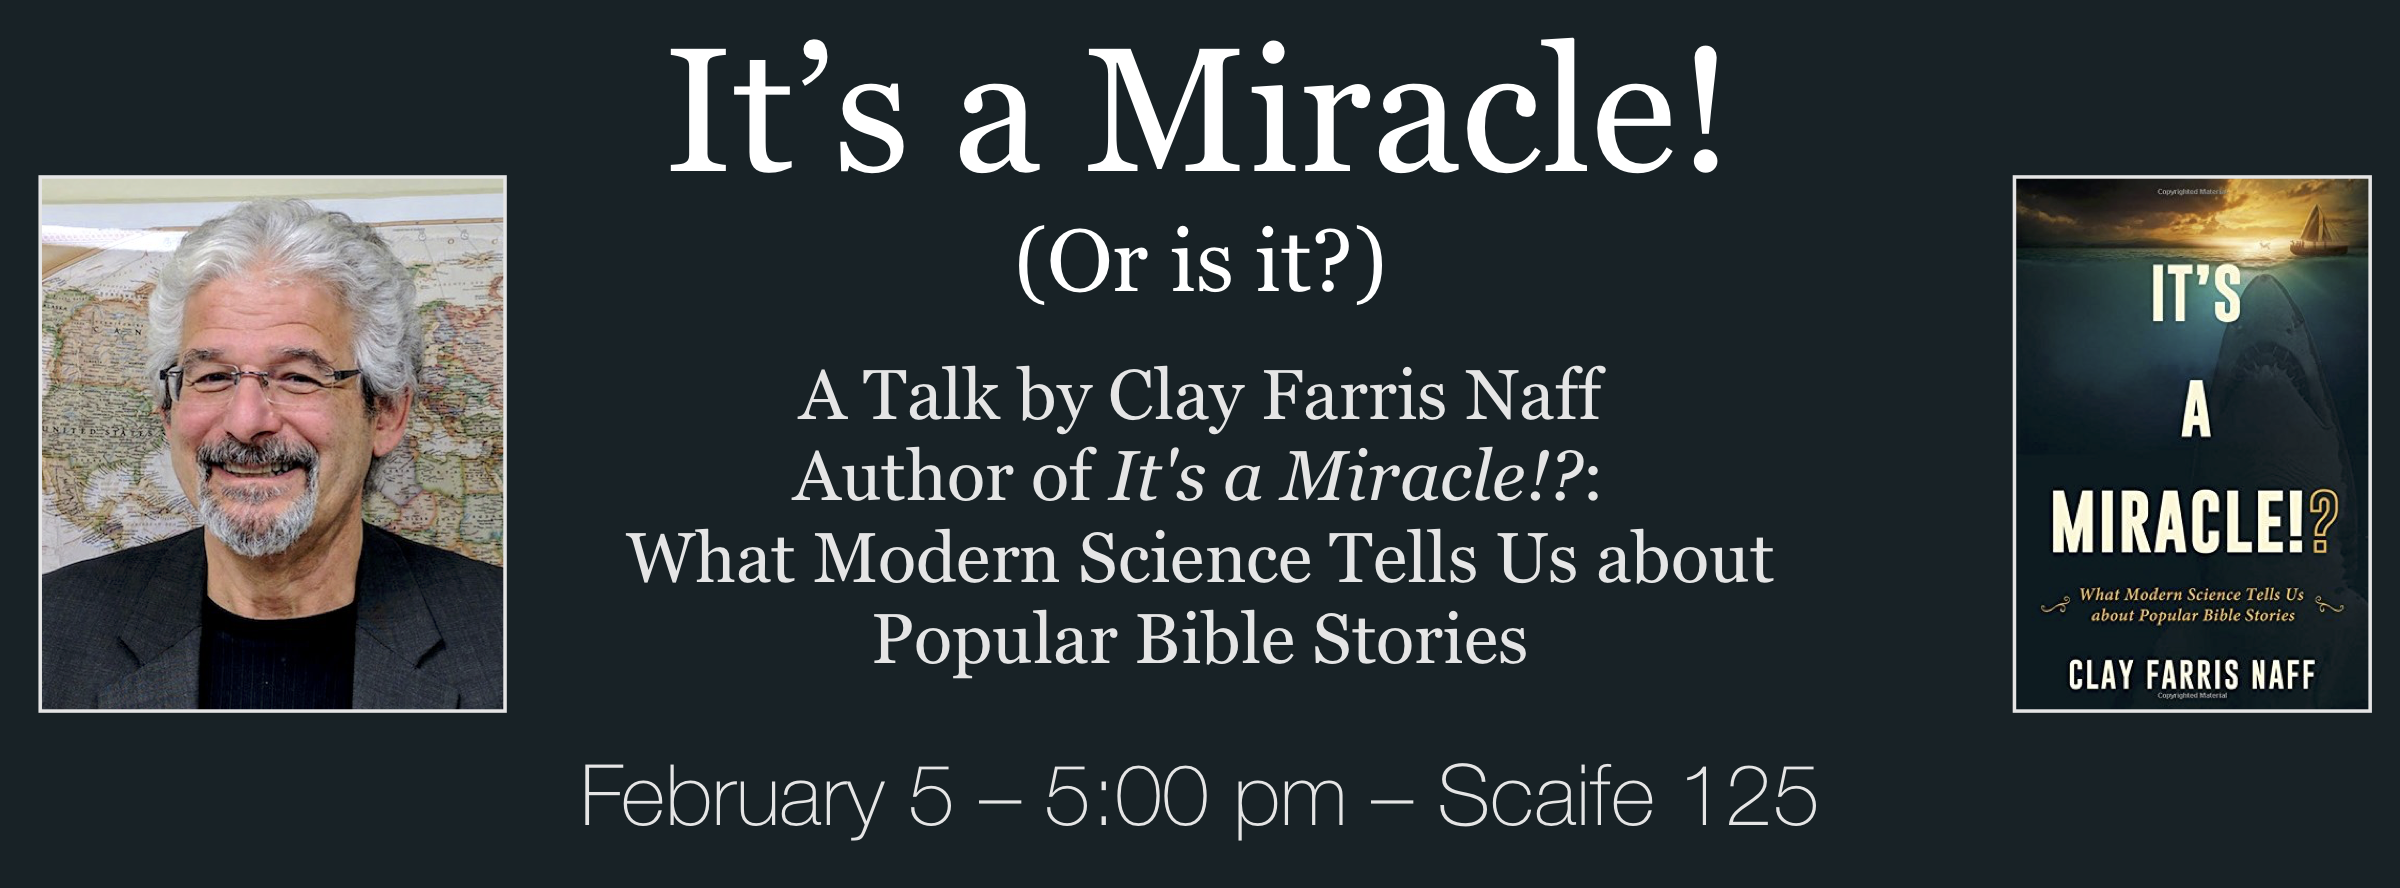 Clay Farris Naff – It's a Miracle! (Or is it?) Banner